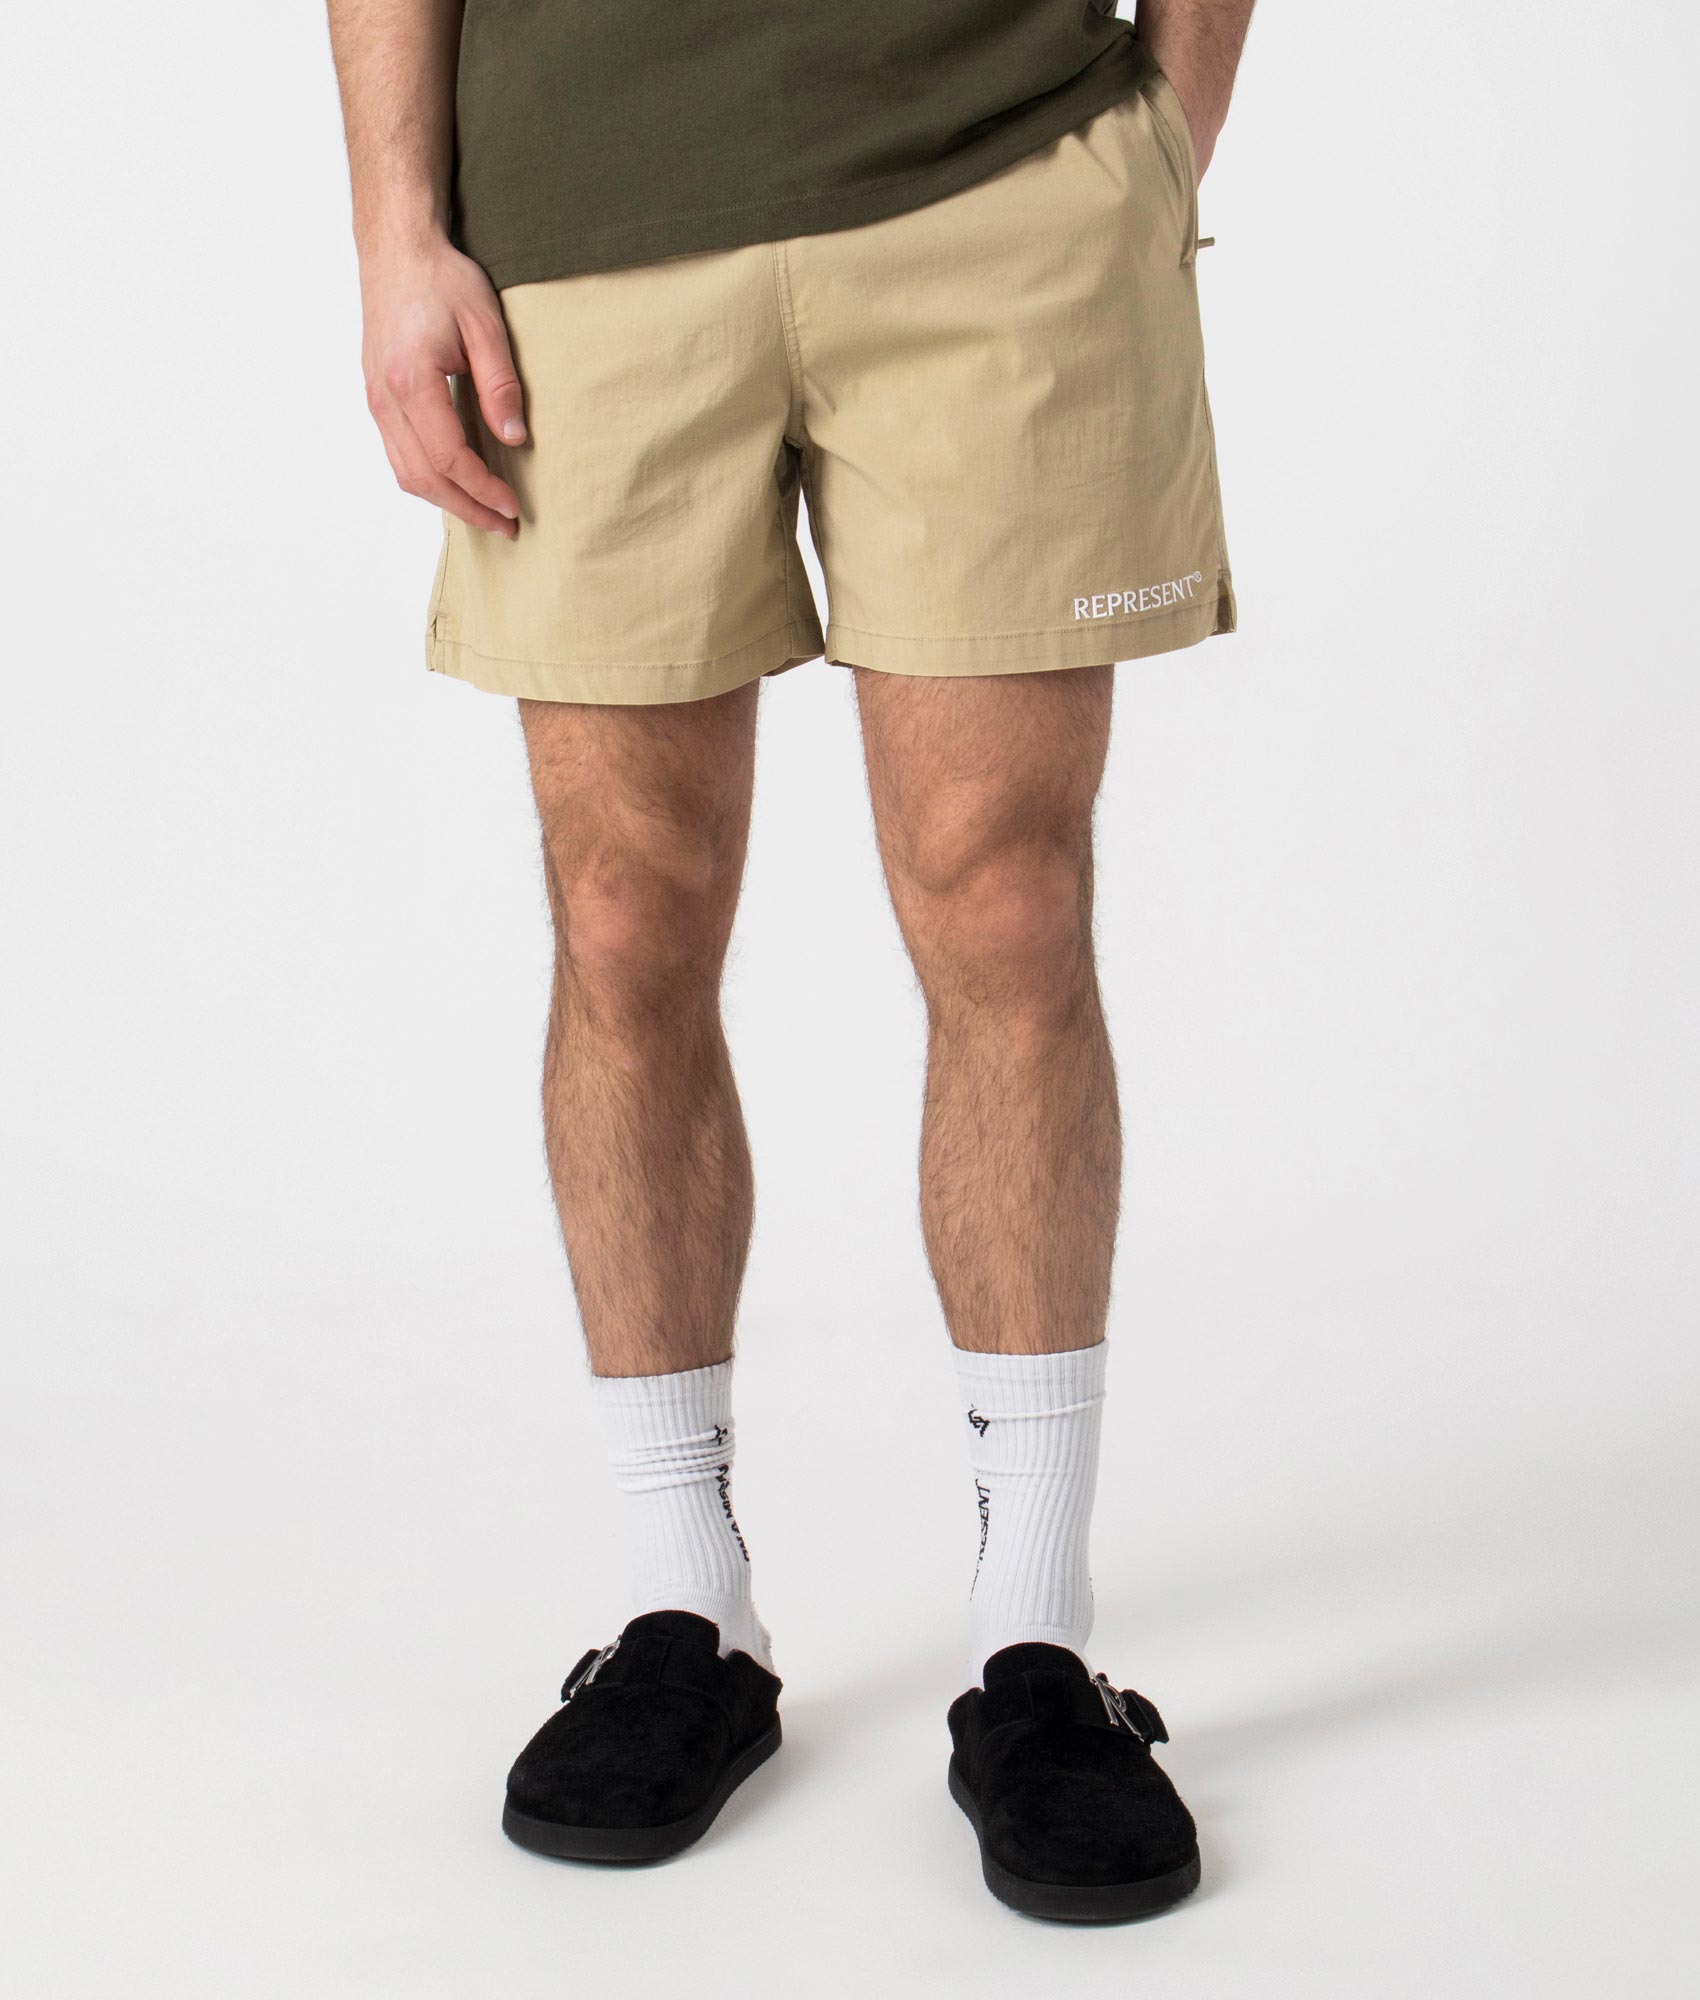 Represent Mens Represent Shorts - Colour: 431 Washed Taupe - Size: XL